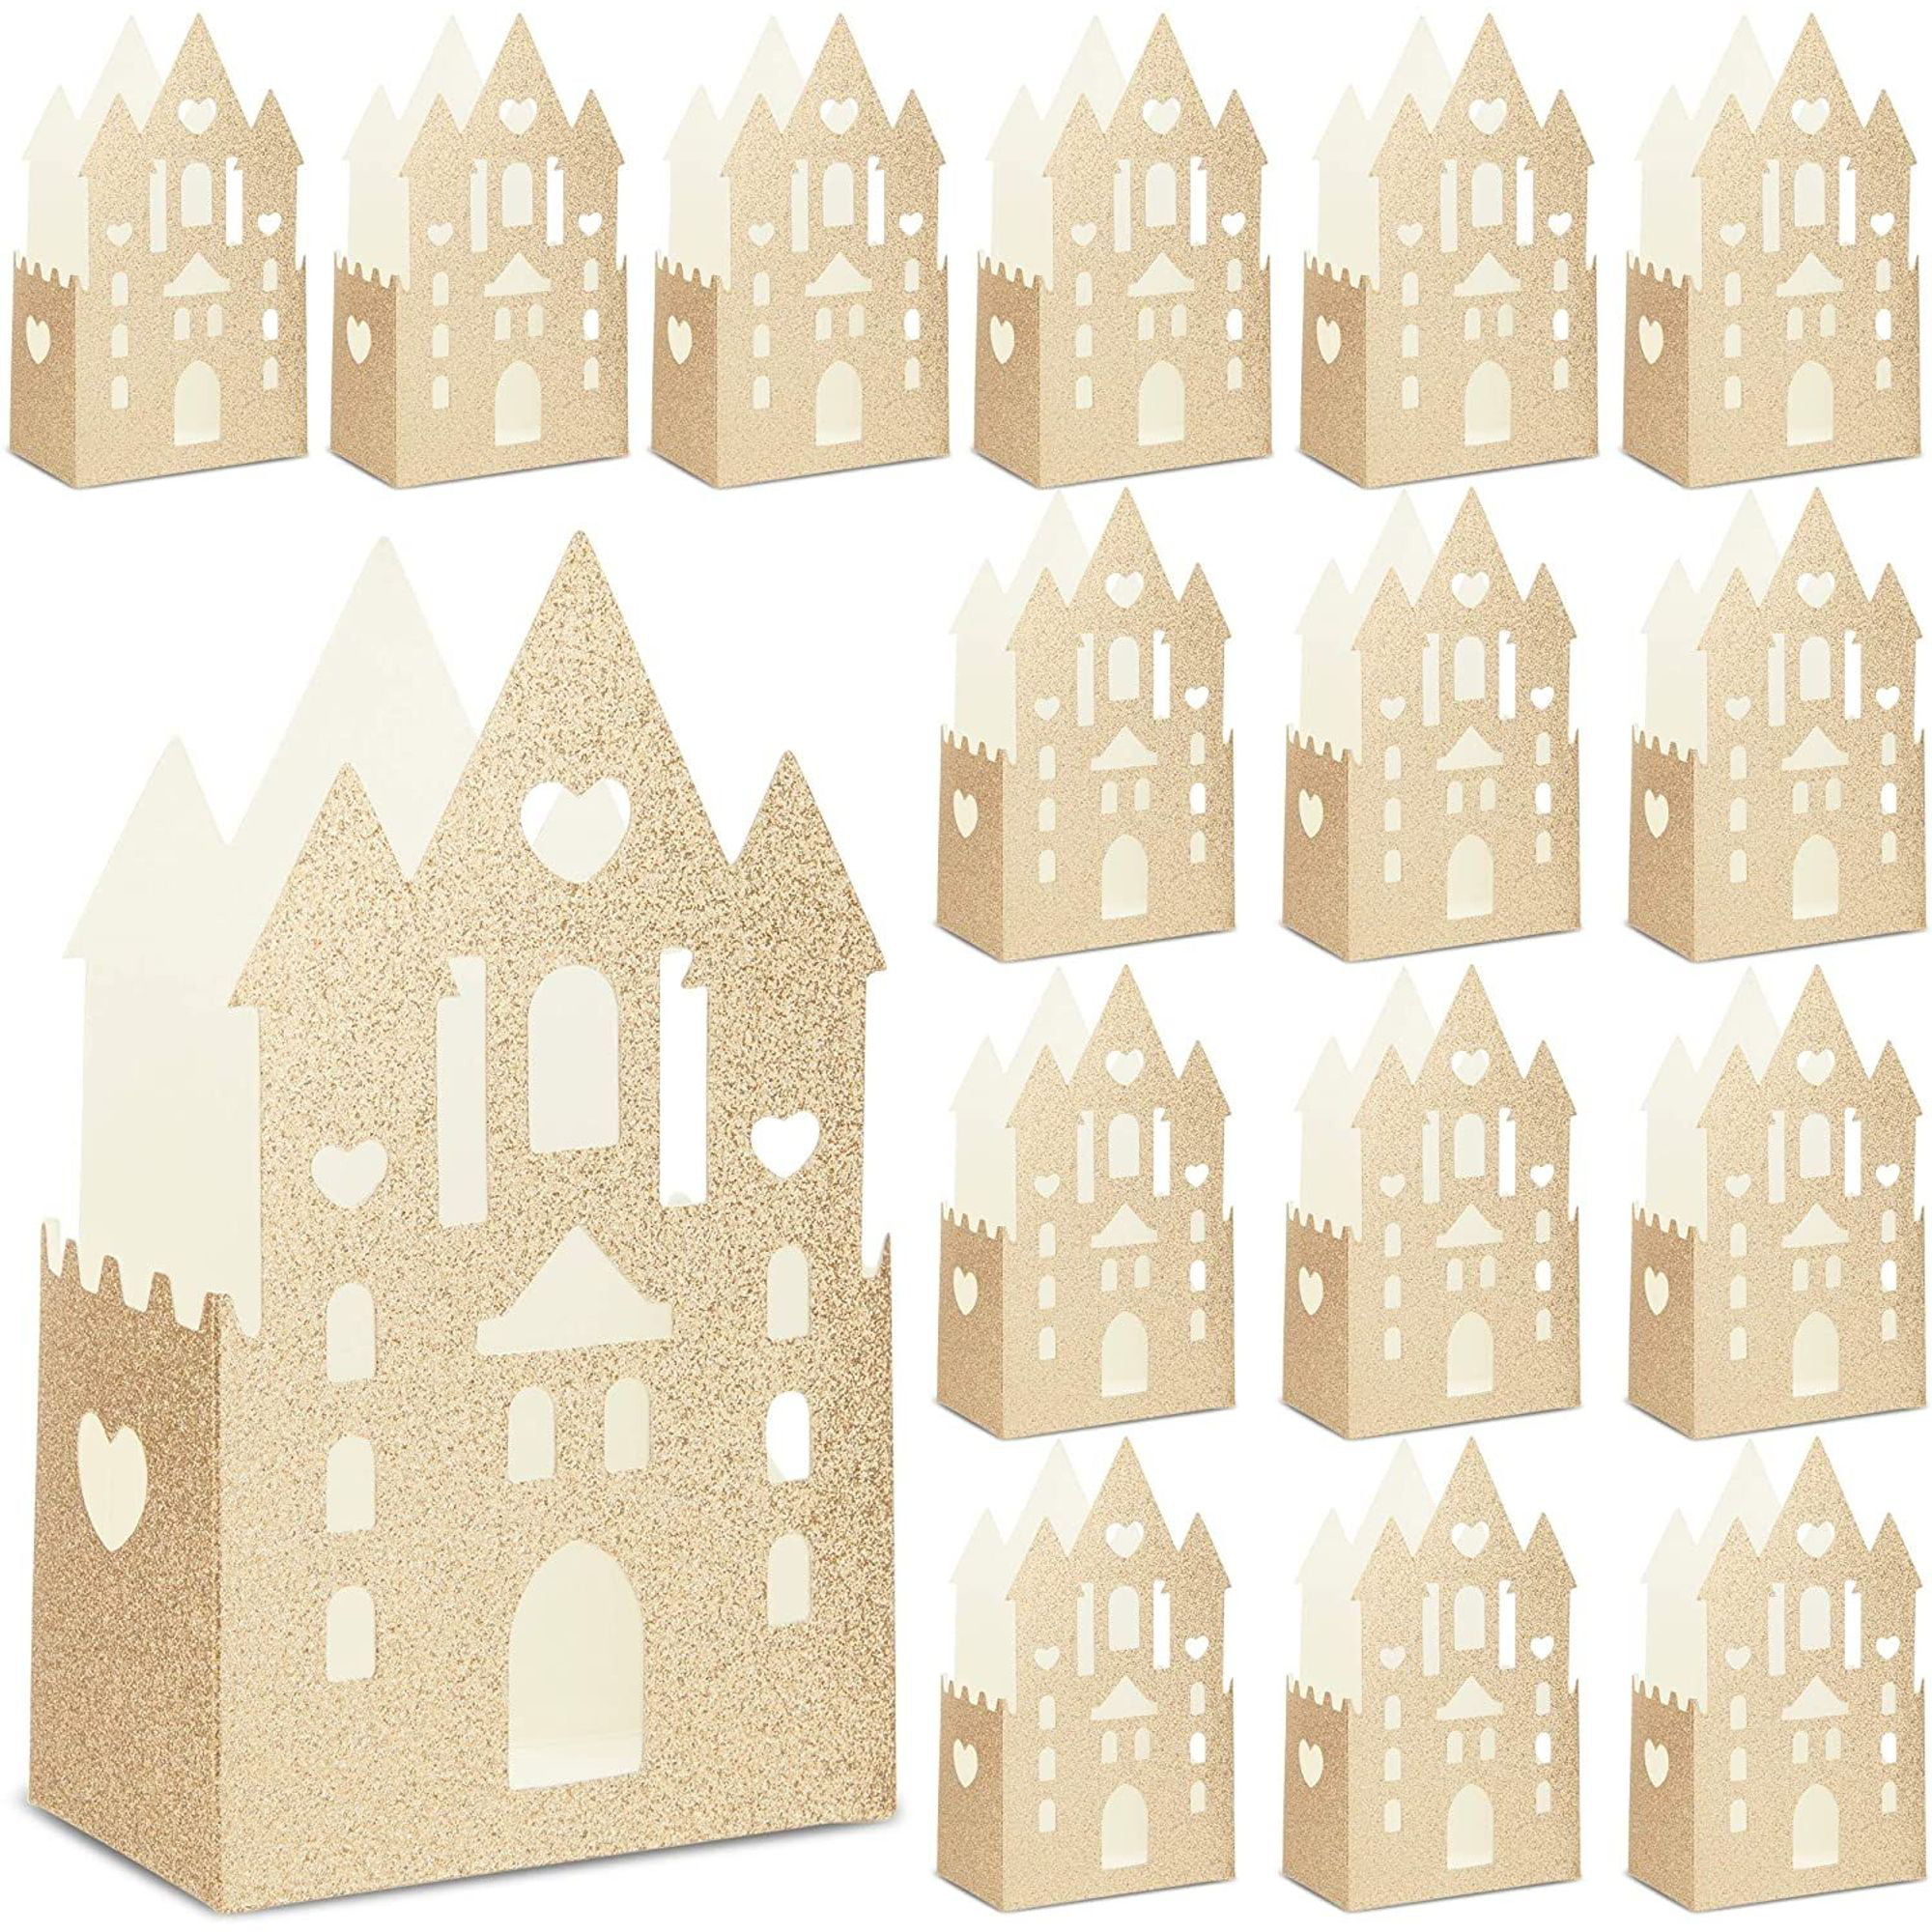 20 Pieces Princess Box Party Supplies Glitter Princess Party Box Castle Candy Box Gold Castle Party Favor Box Glitter Party Favor Boxes for Wedding Birthday Party Bridal Baby Shower Decoration